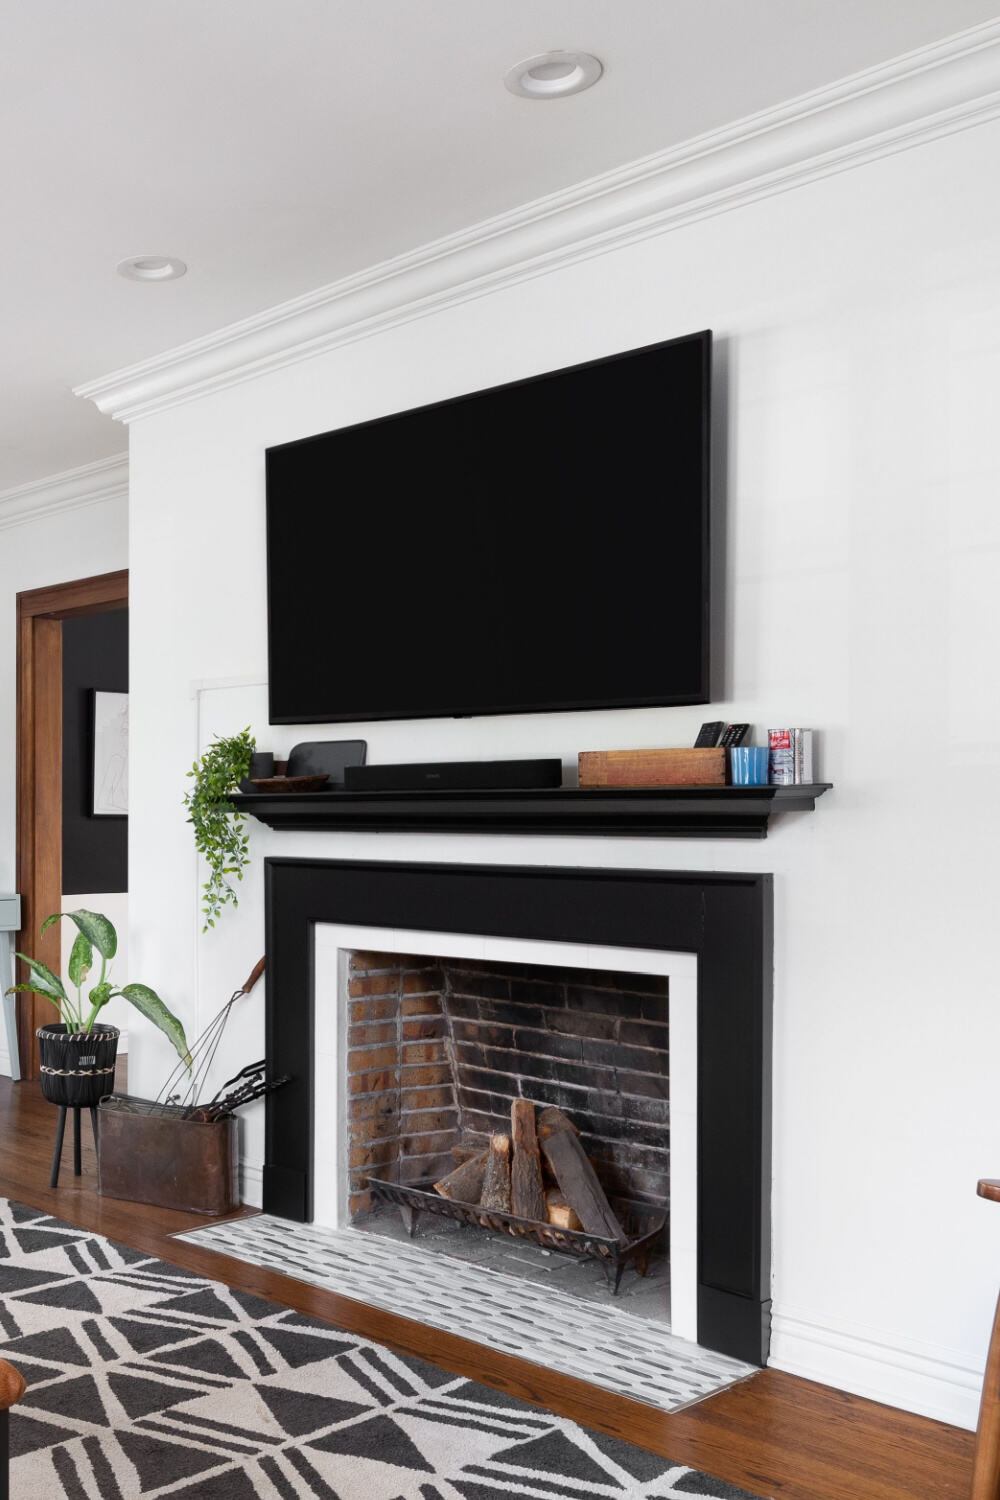 mounted tv above a shelf and a fireplace